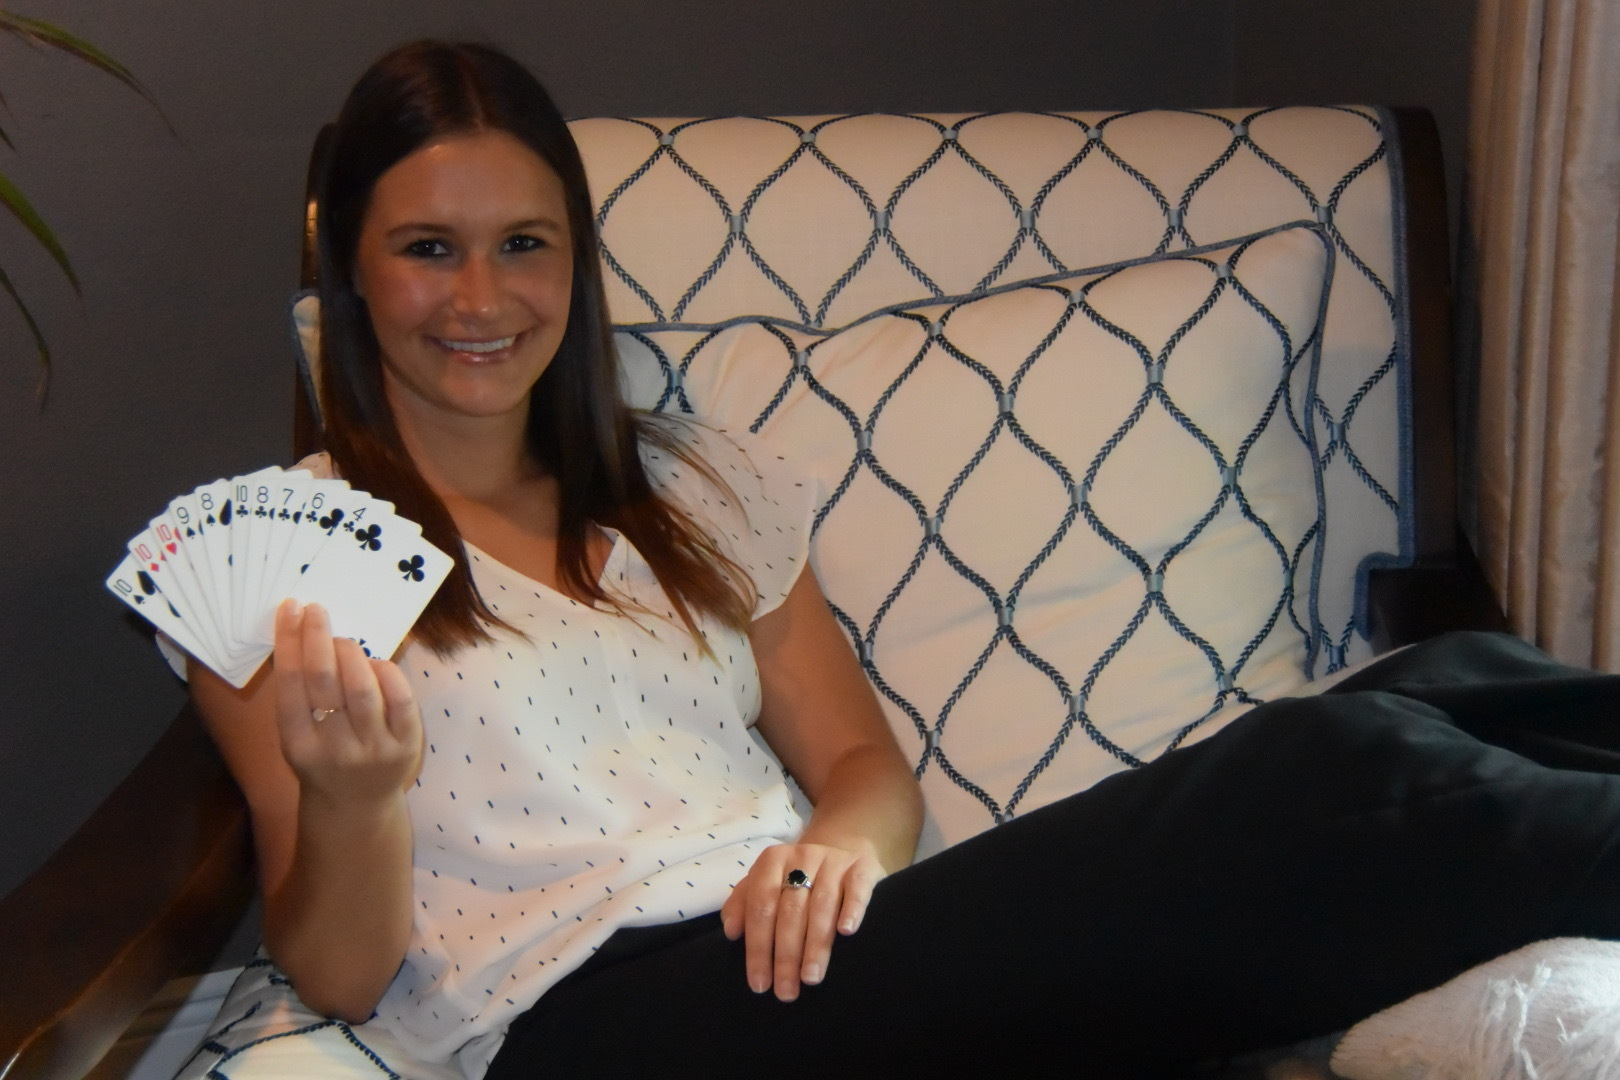 COURTESY PHOTO — Erin VanderVeen, with Stratum Health/Tidewell Hospice, relaxes at home while showing off her card-handling skills.